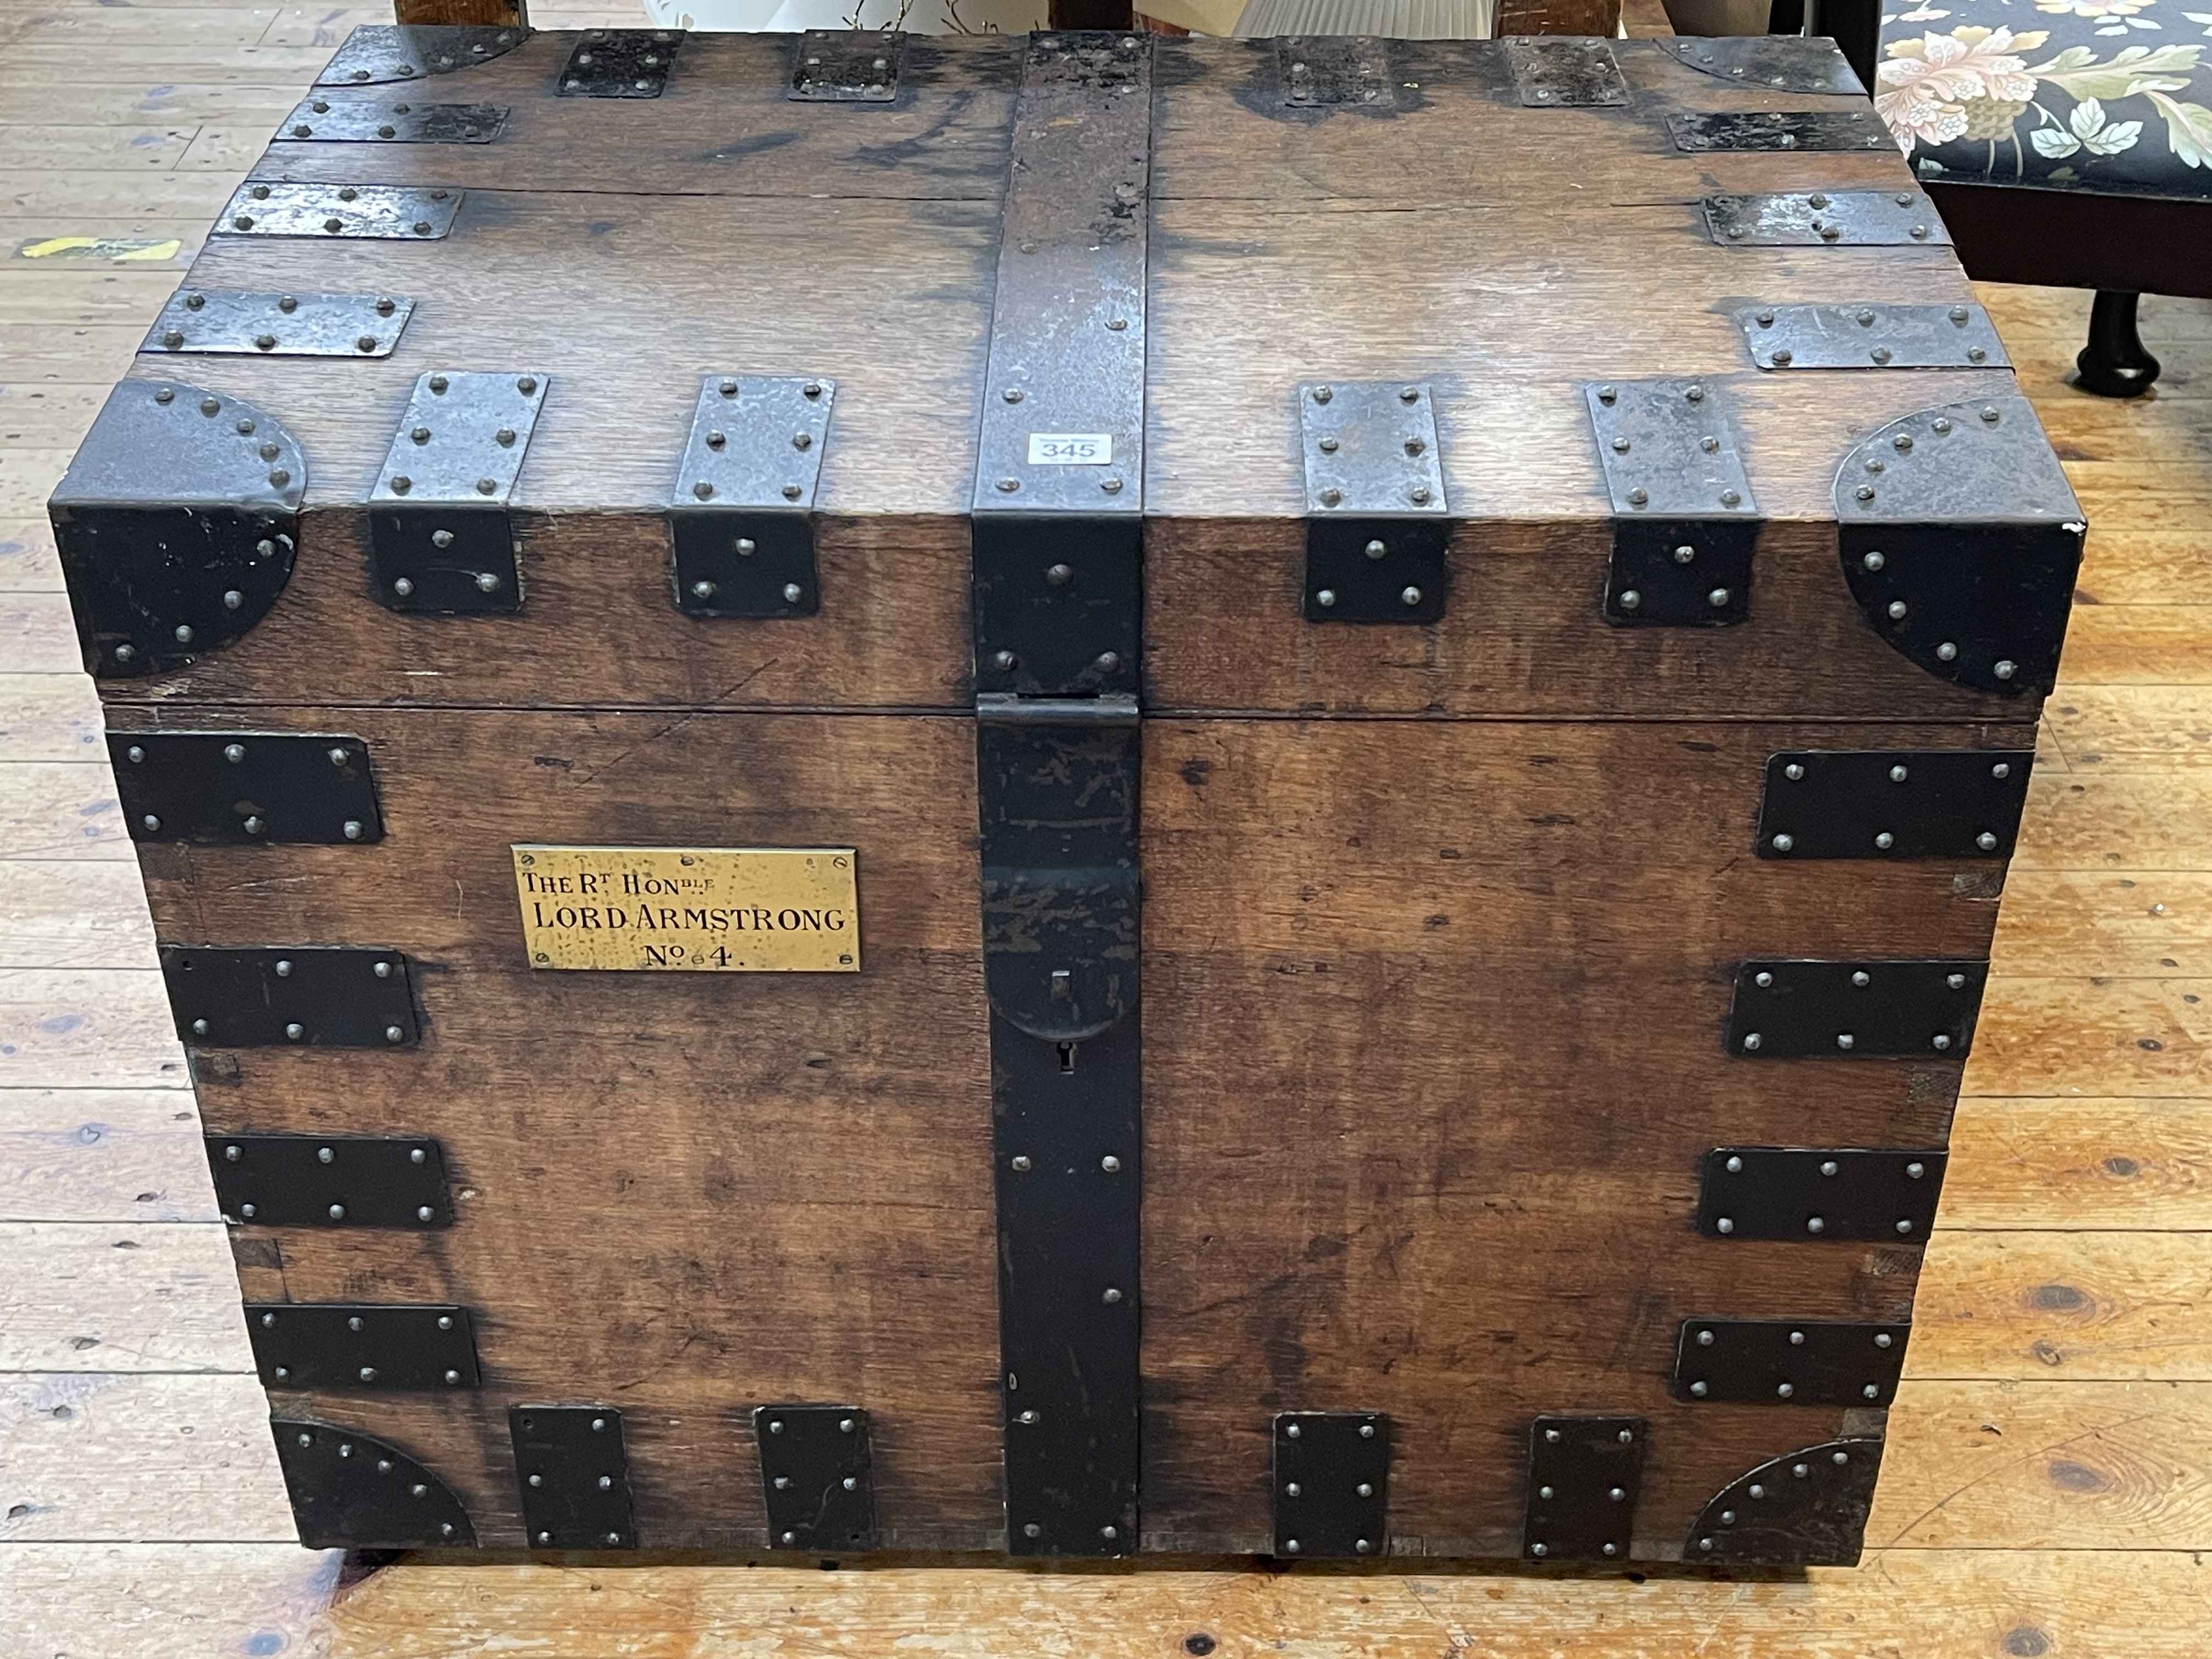 Hunt & Roskell Ltd, Silversmiths, London, antique oak and iron bound silver chest, 60.